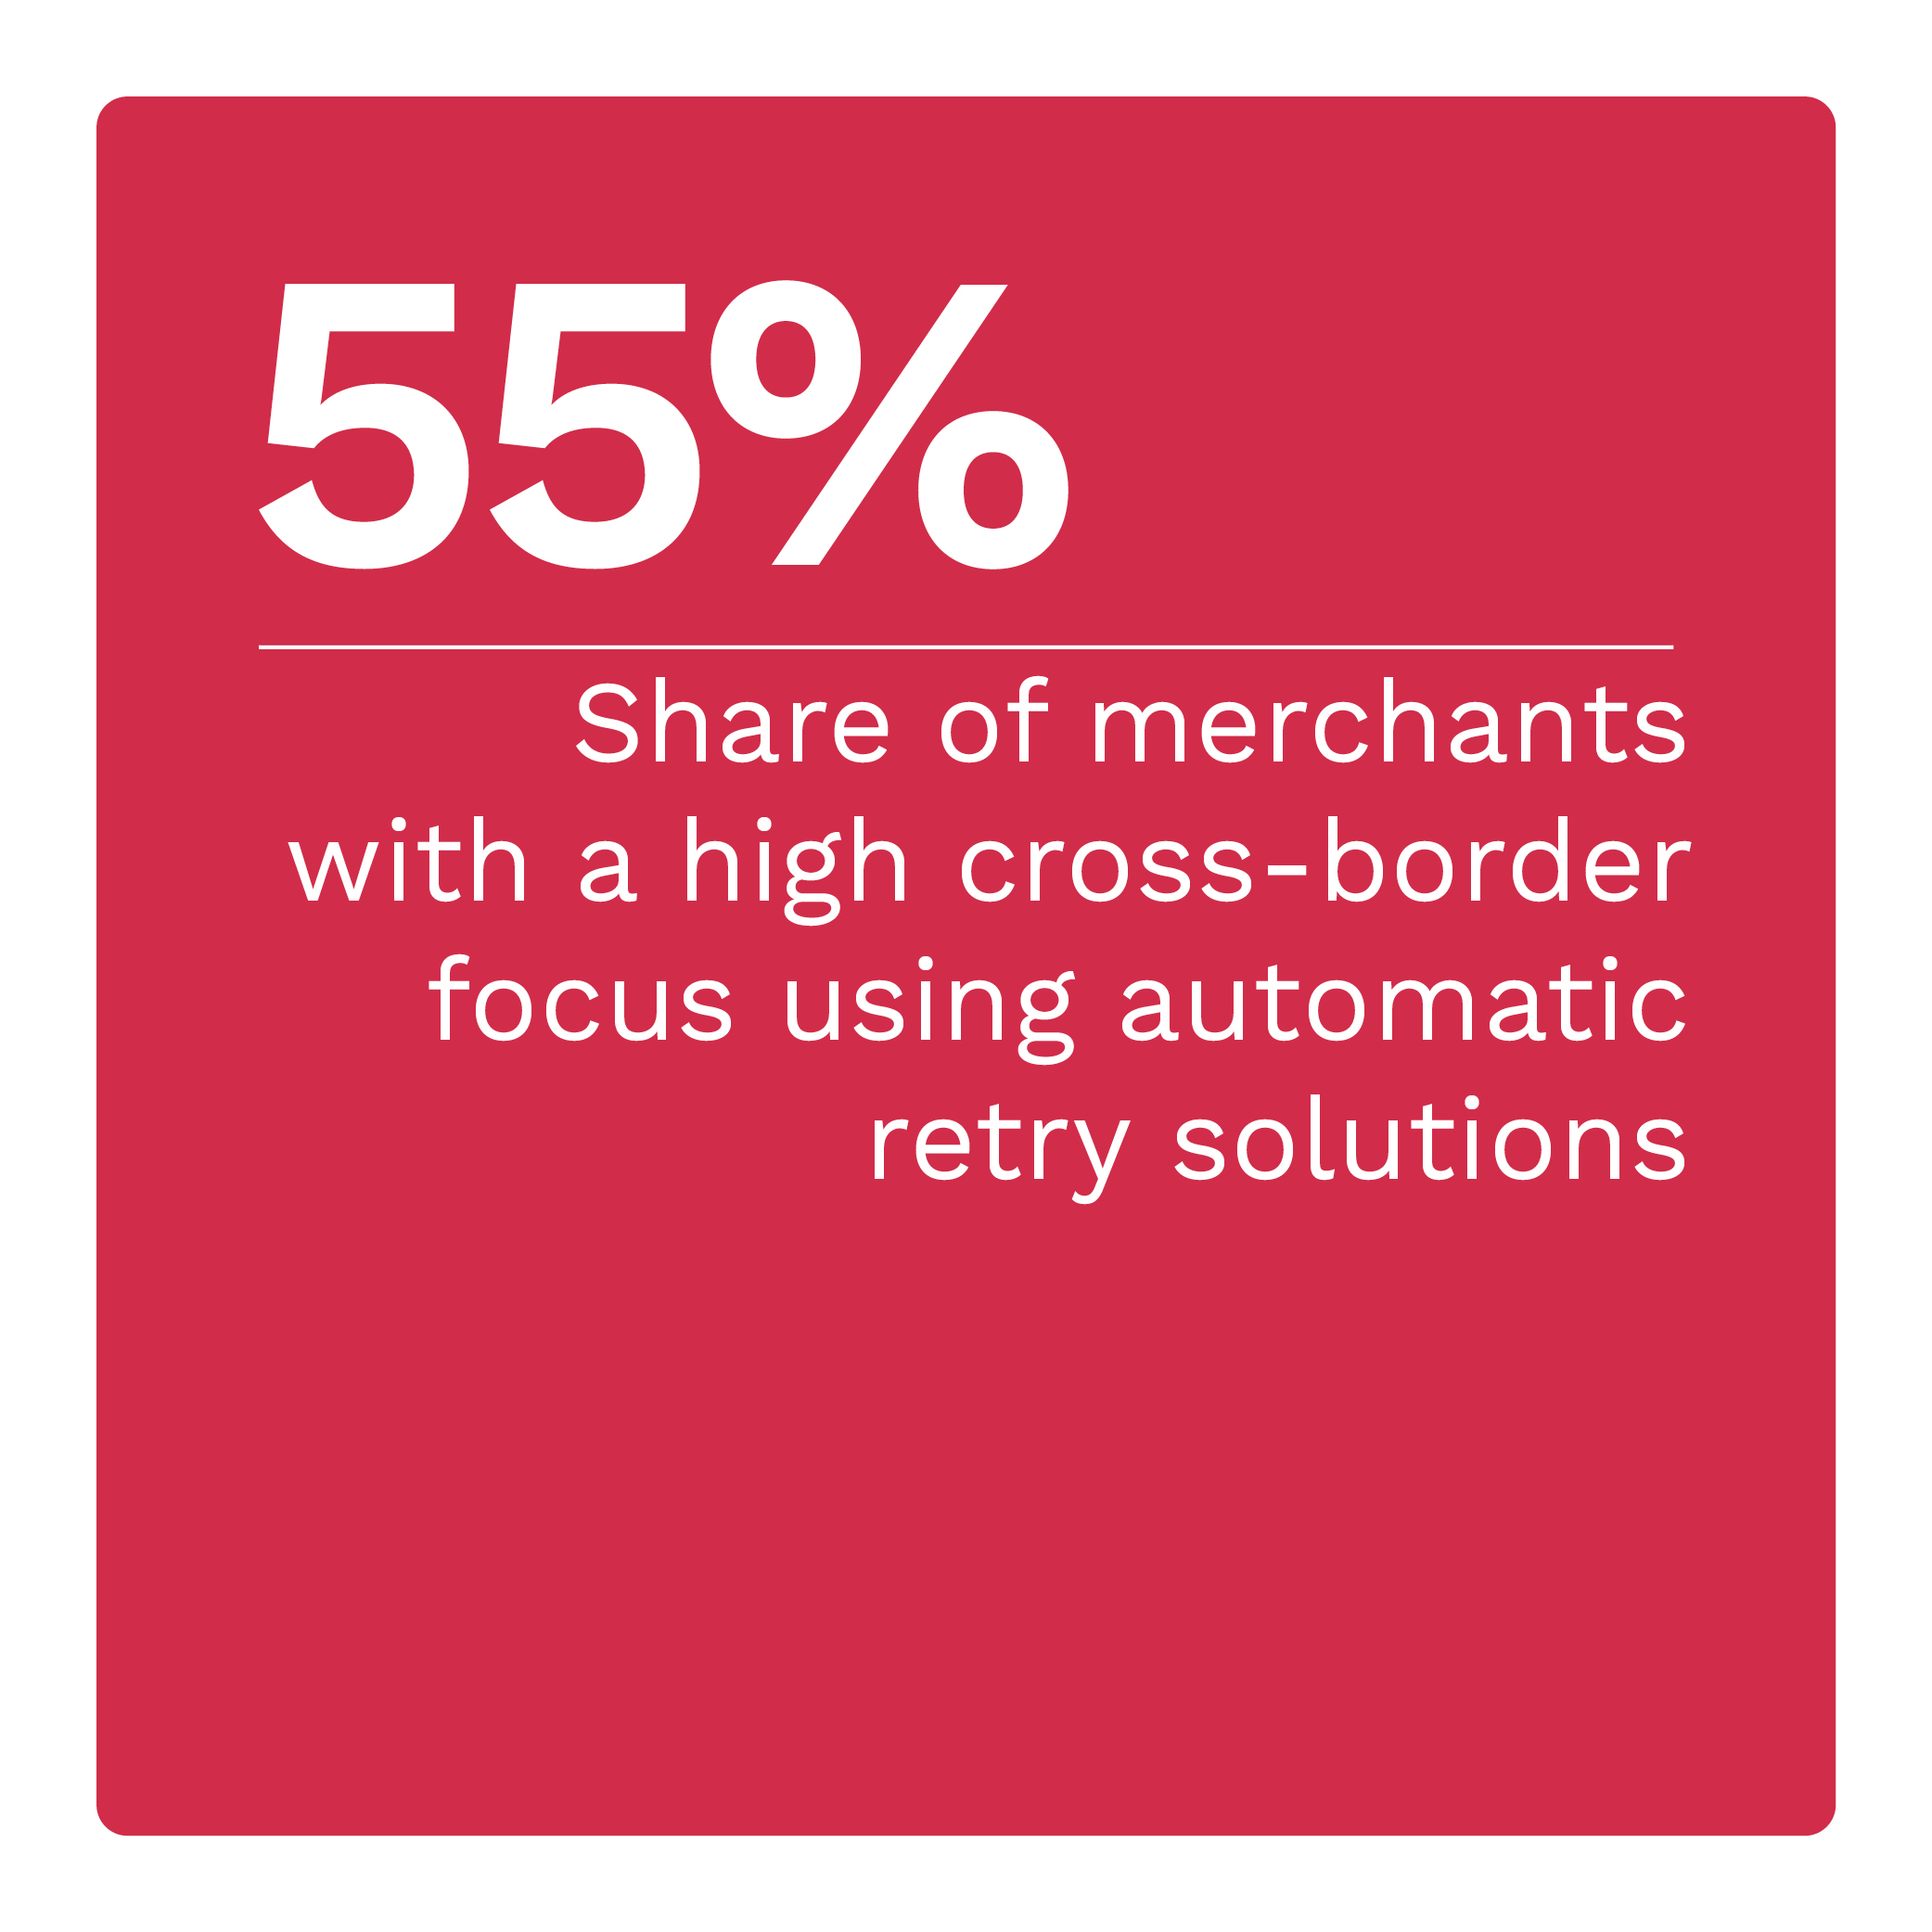 55%: Share of merchants with a high cross-border focus using automatic retry solutions